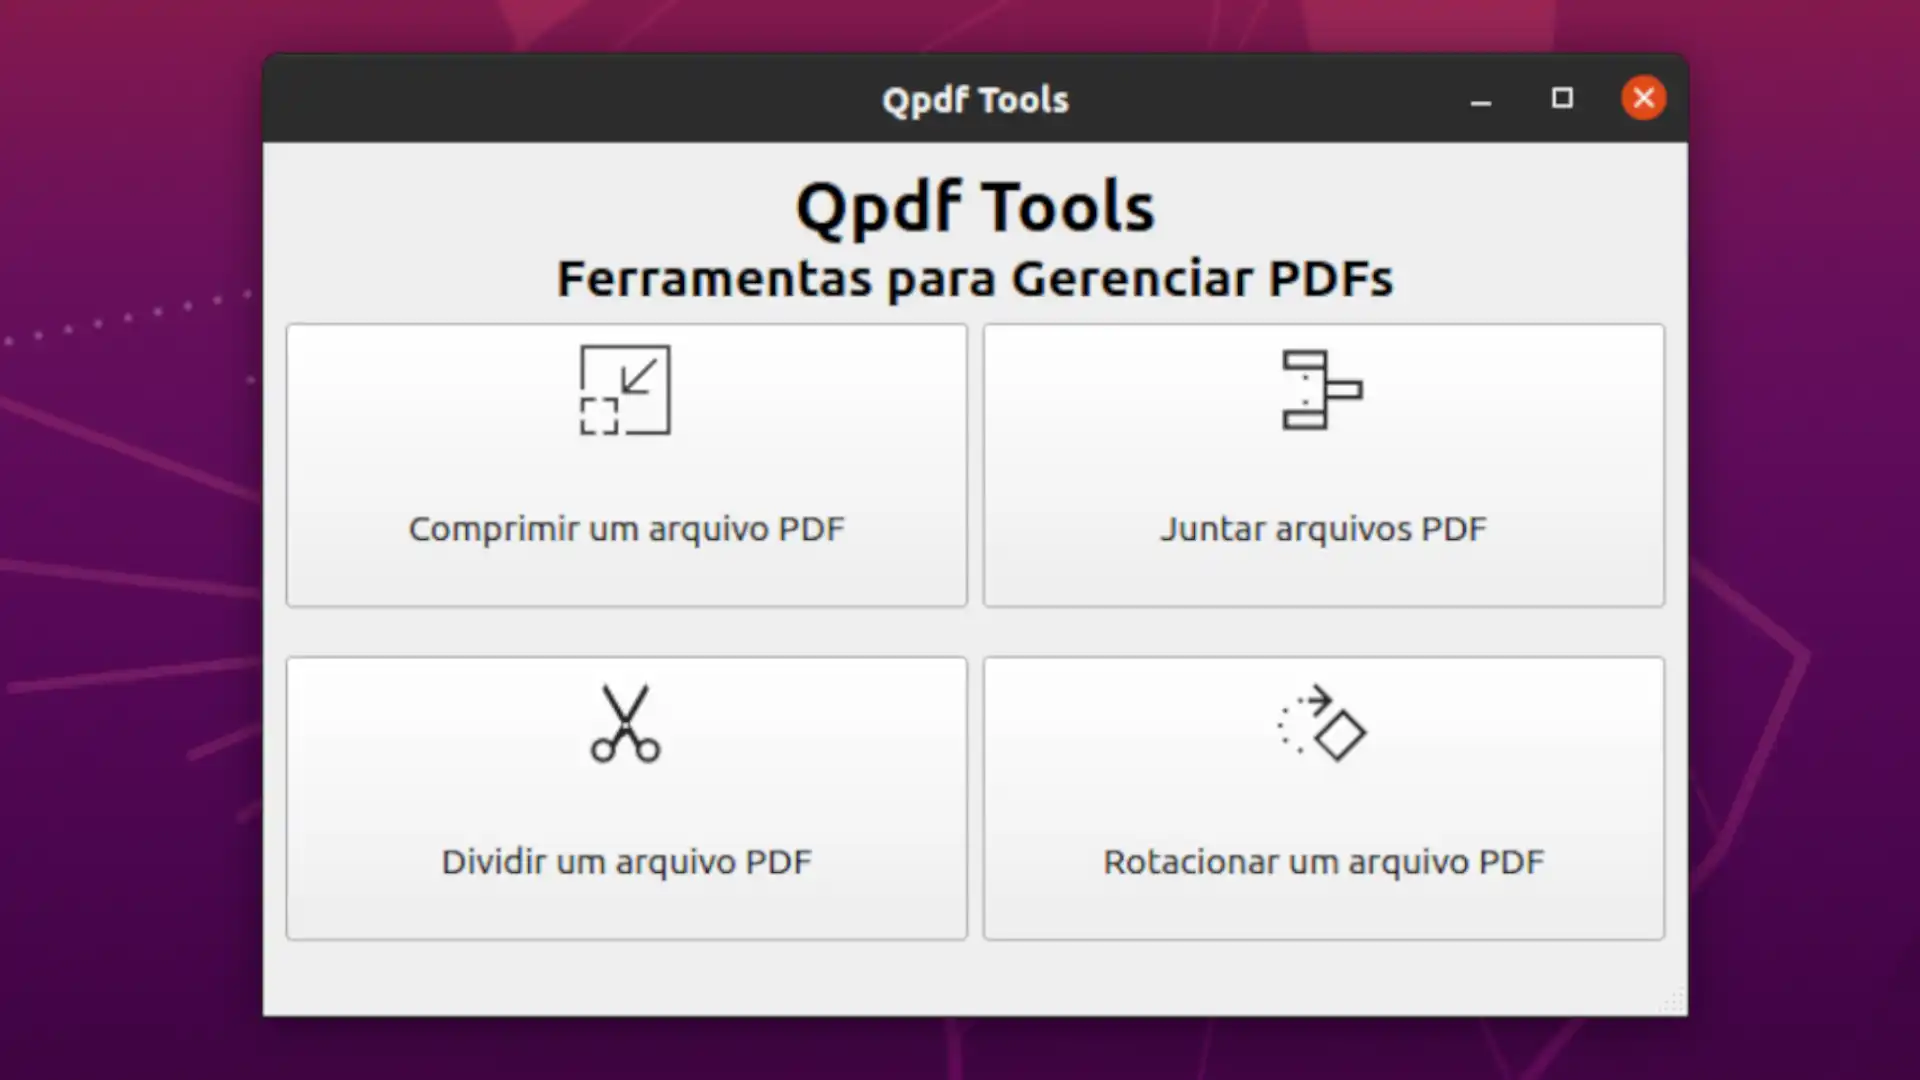 Picture of the Qpdf Tools program home screen